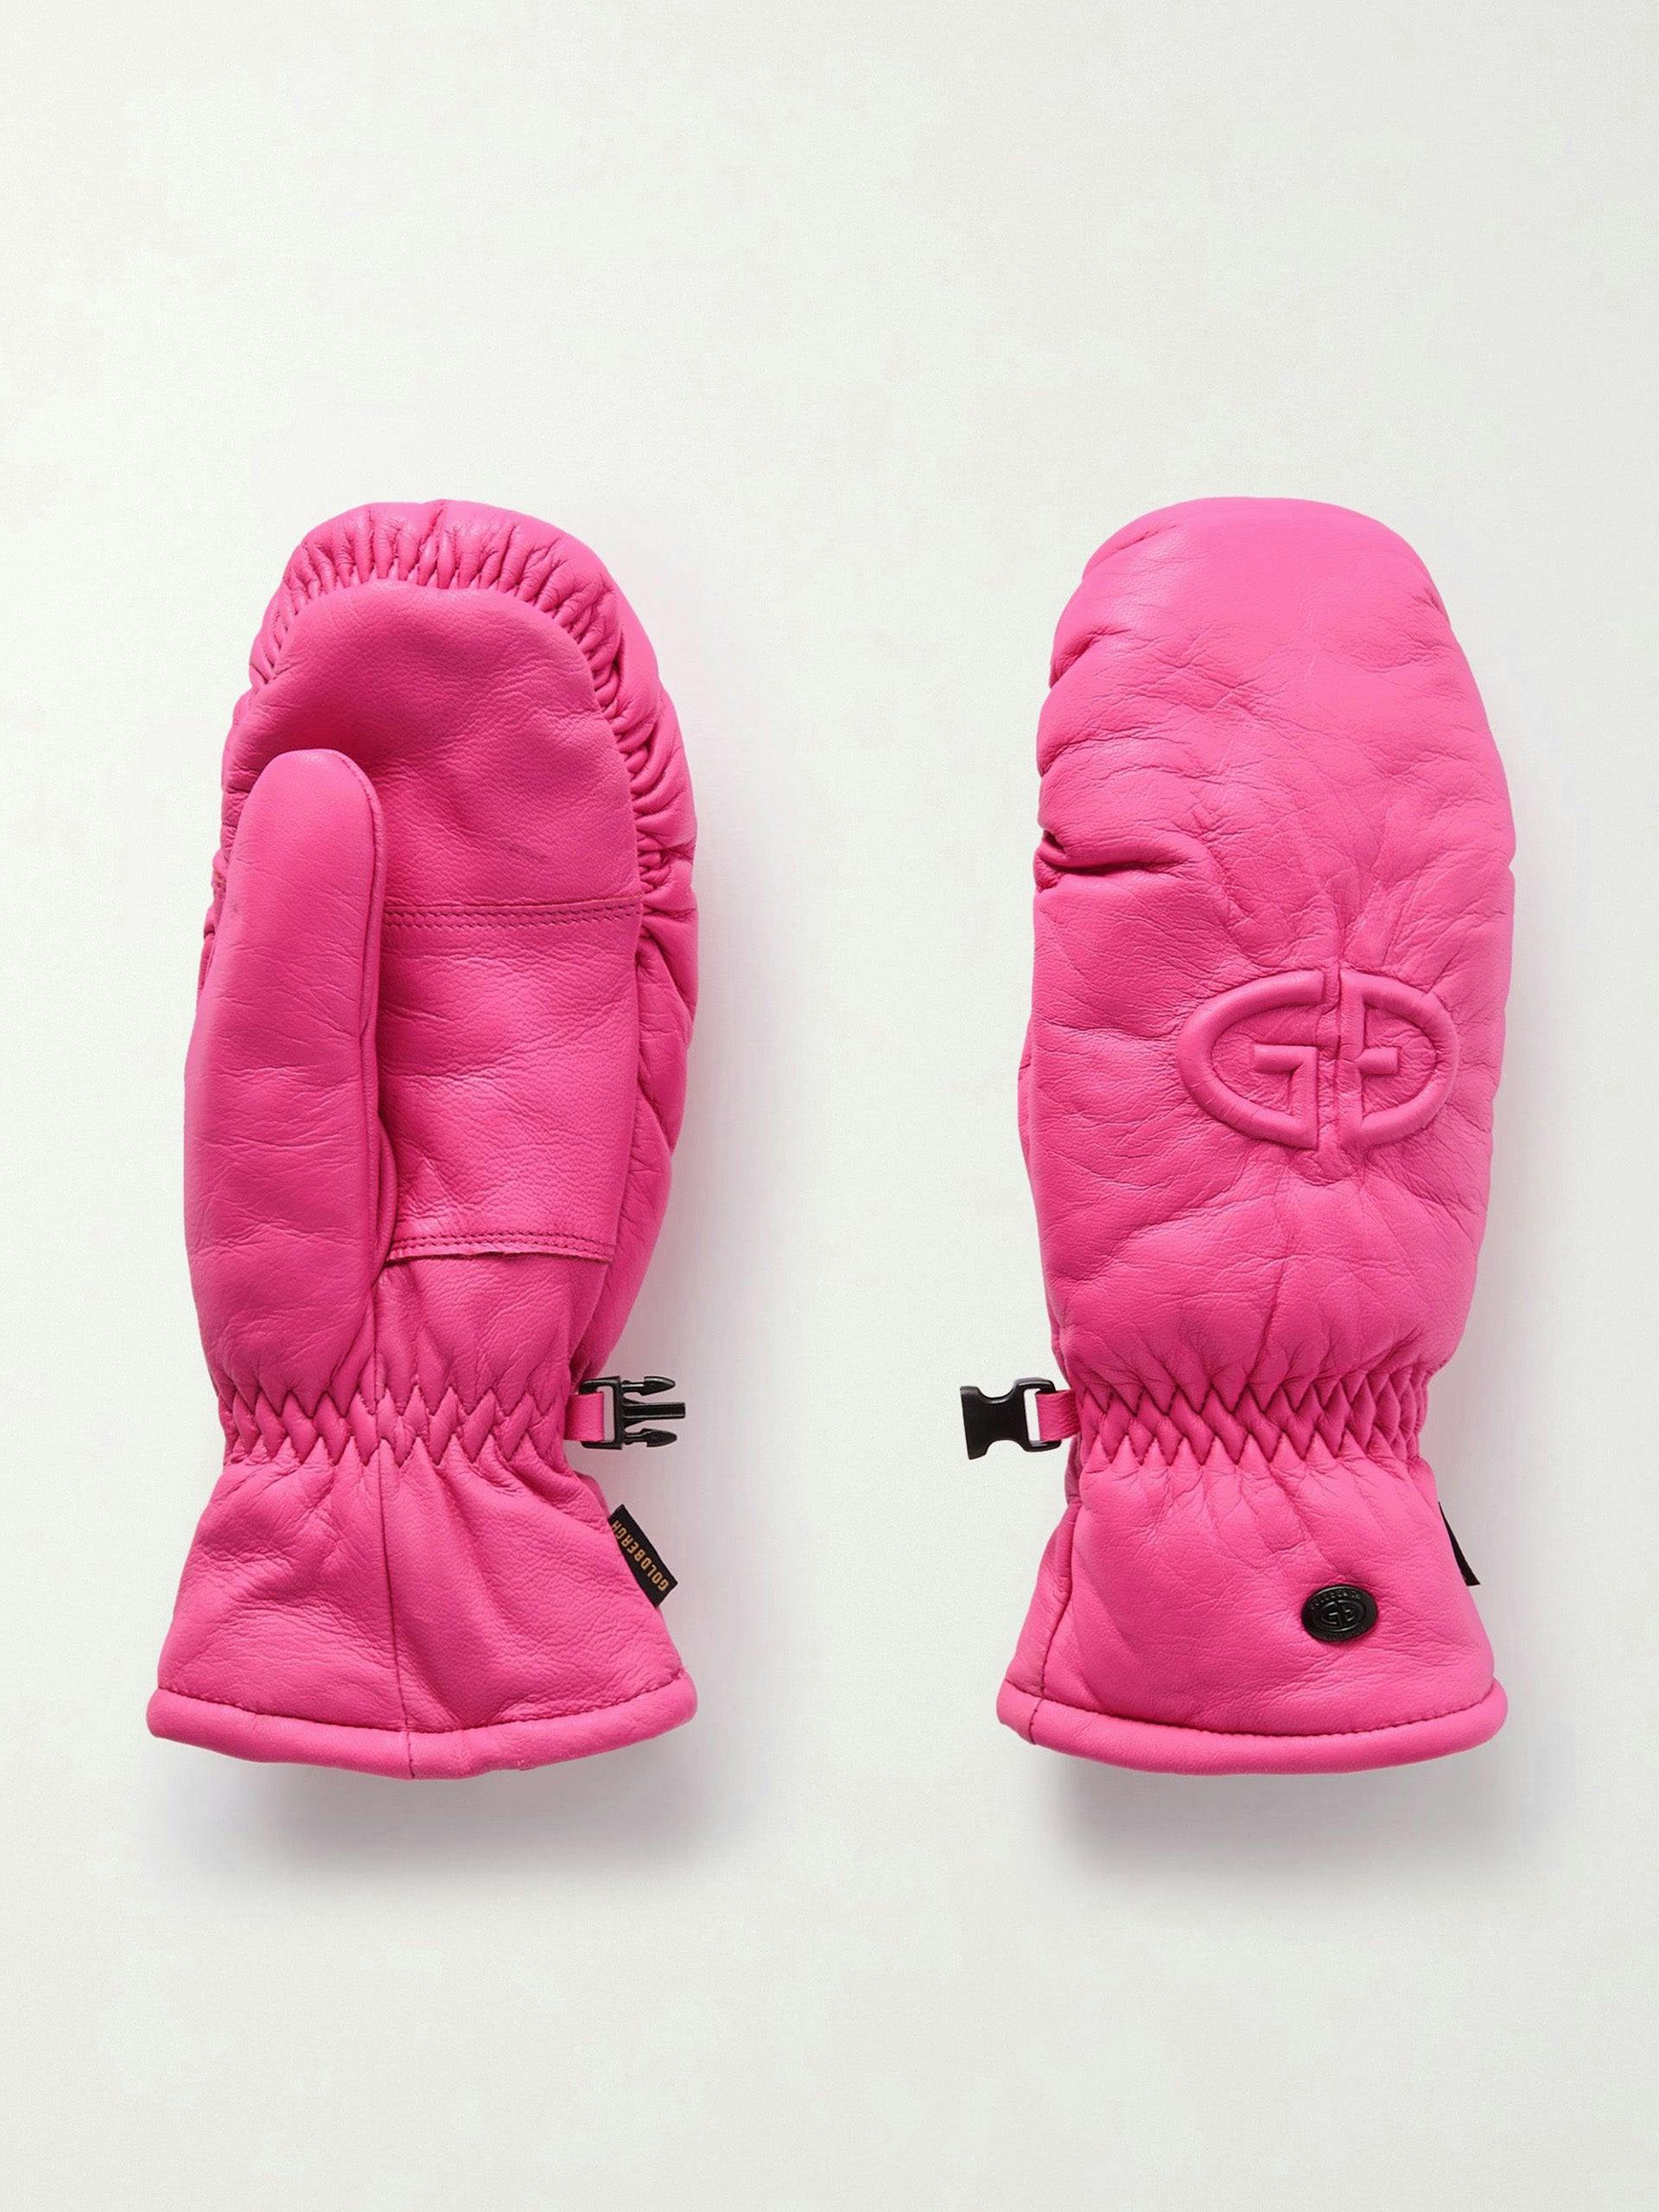 Bright pink padded leather ski mittens